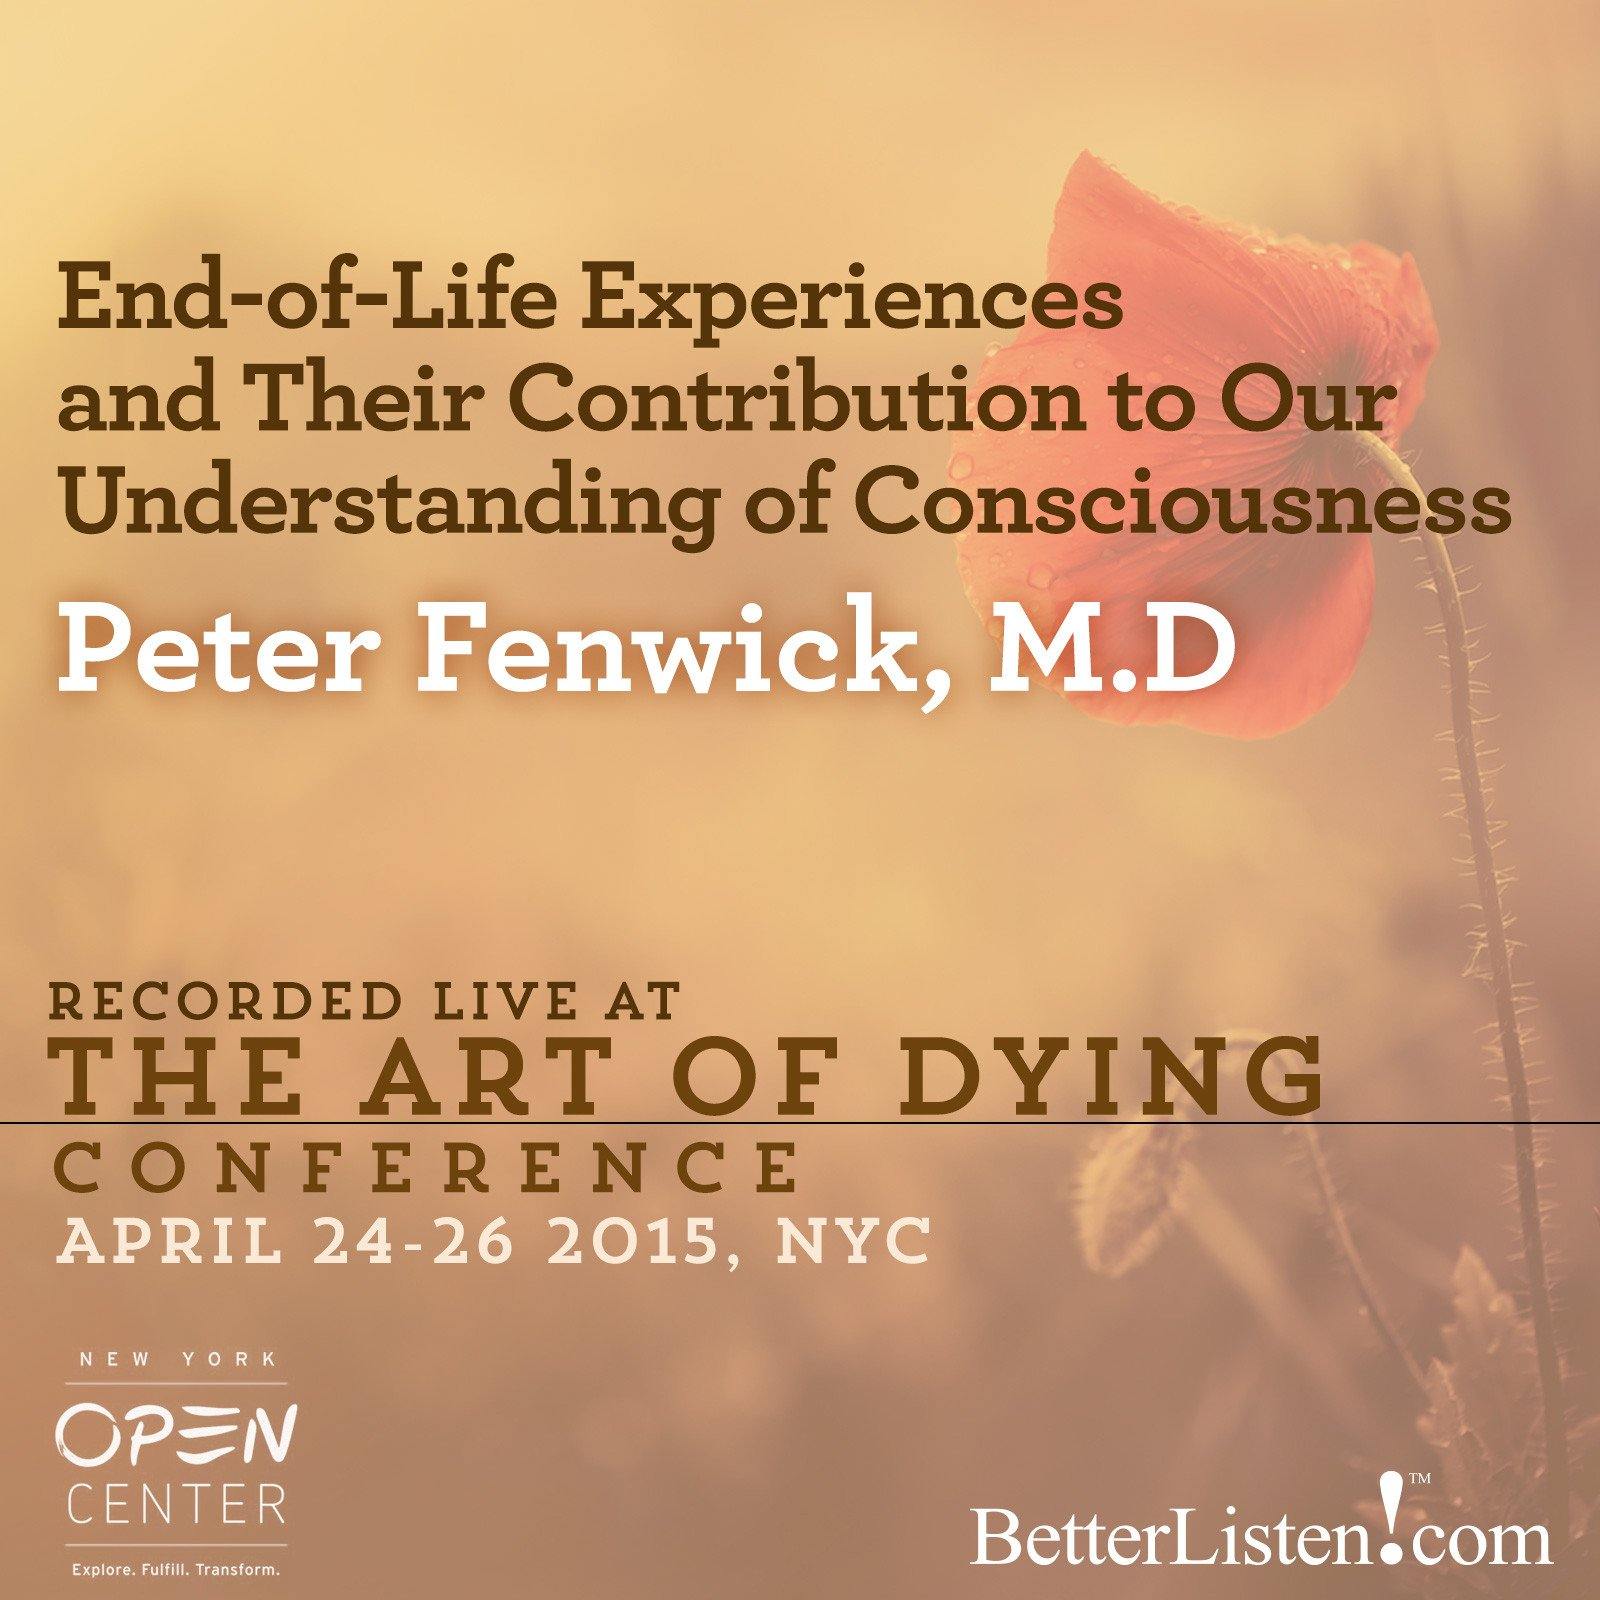 End of Life Experiences and Their Contribution to our Understanding of Consciousness with Peter Fenwick, M.D. Audio Program BetterListen! - BetterListen!